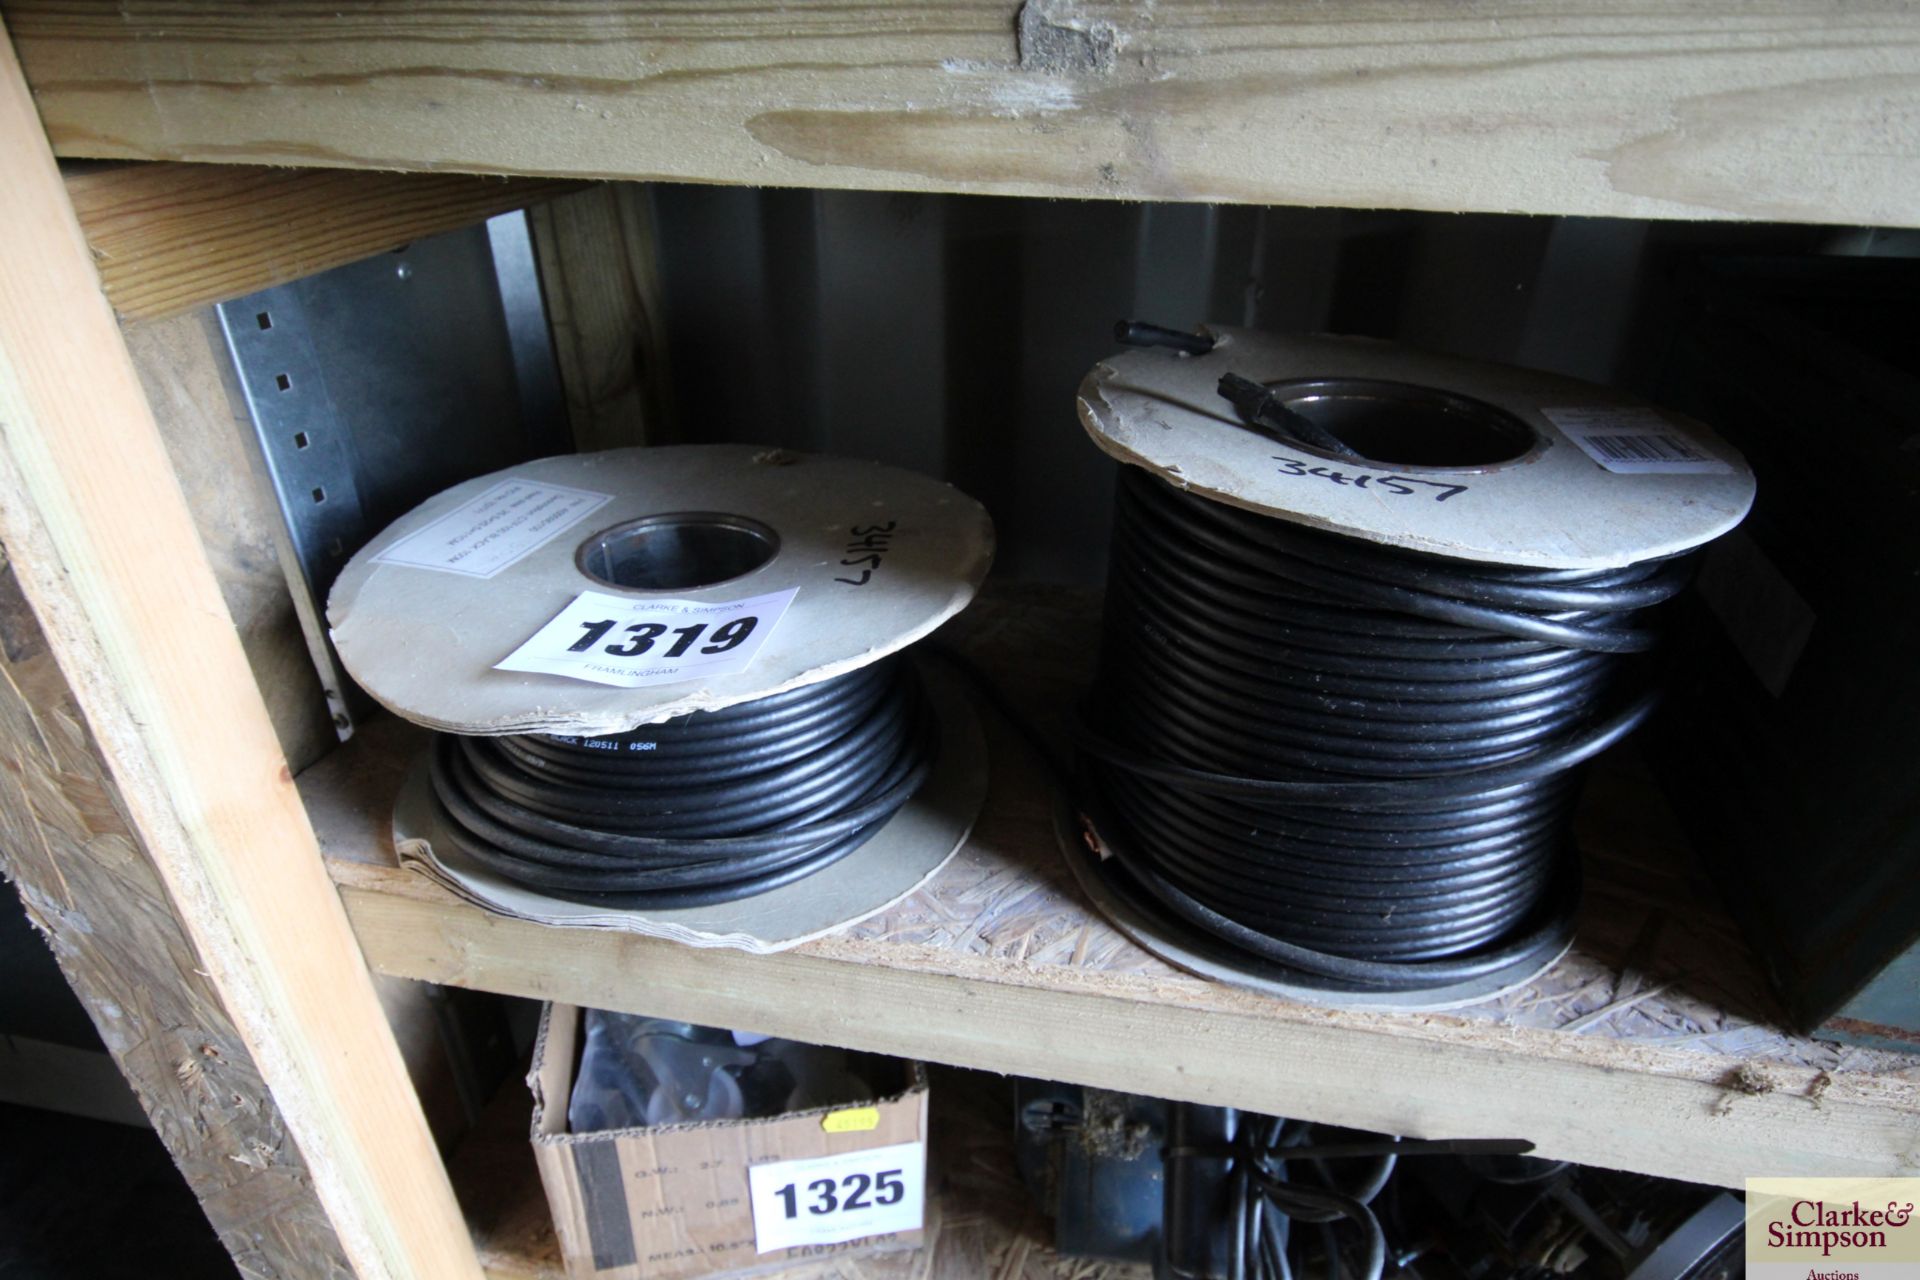 50m coax cable and 84m satellite cable.